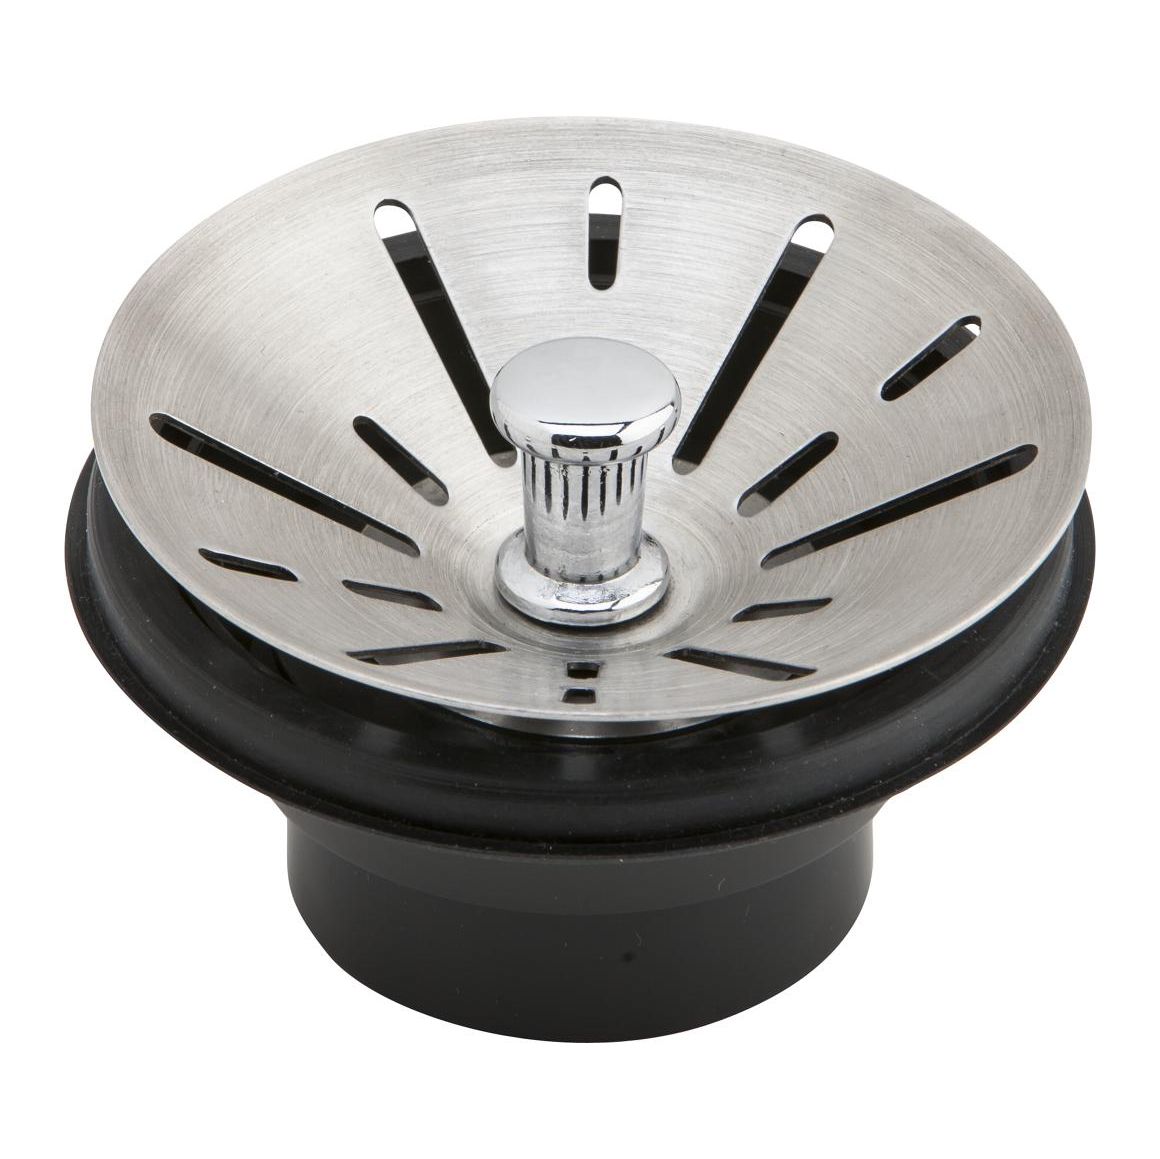 Disposal Stopper/Strainer for Perfect Drain or InSinkErator Disposal Satin Finish